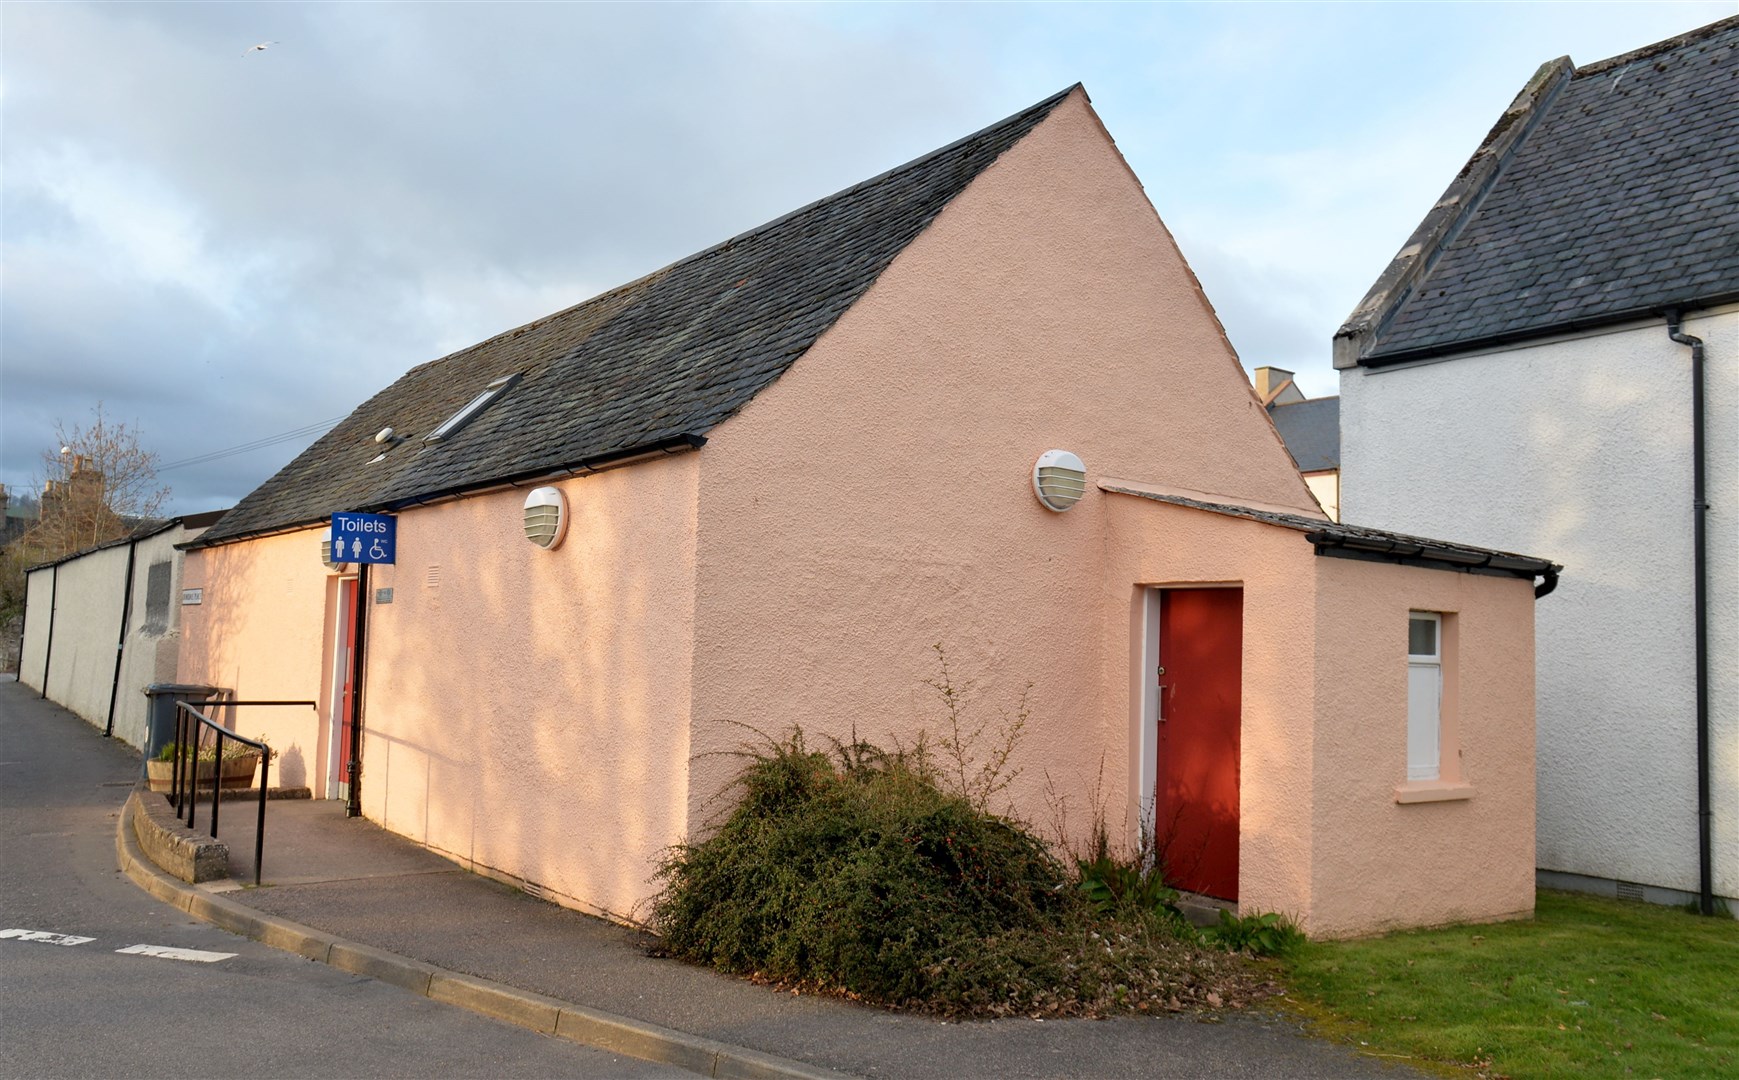 Vandals left Dingwall Public Toilets 'unfit for use' and they will now be closed.